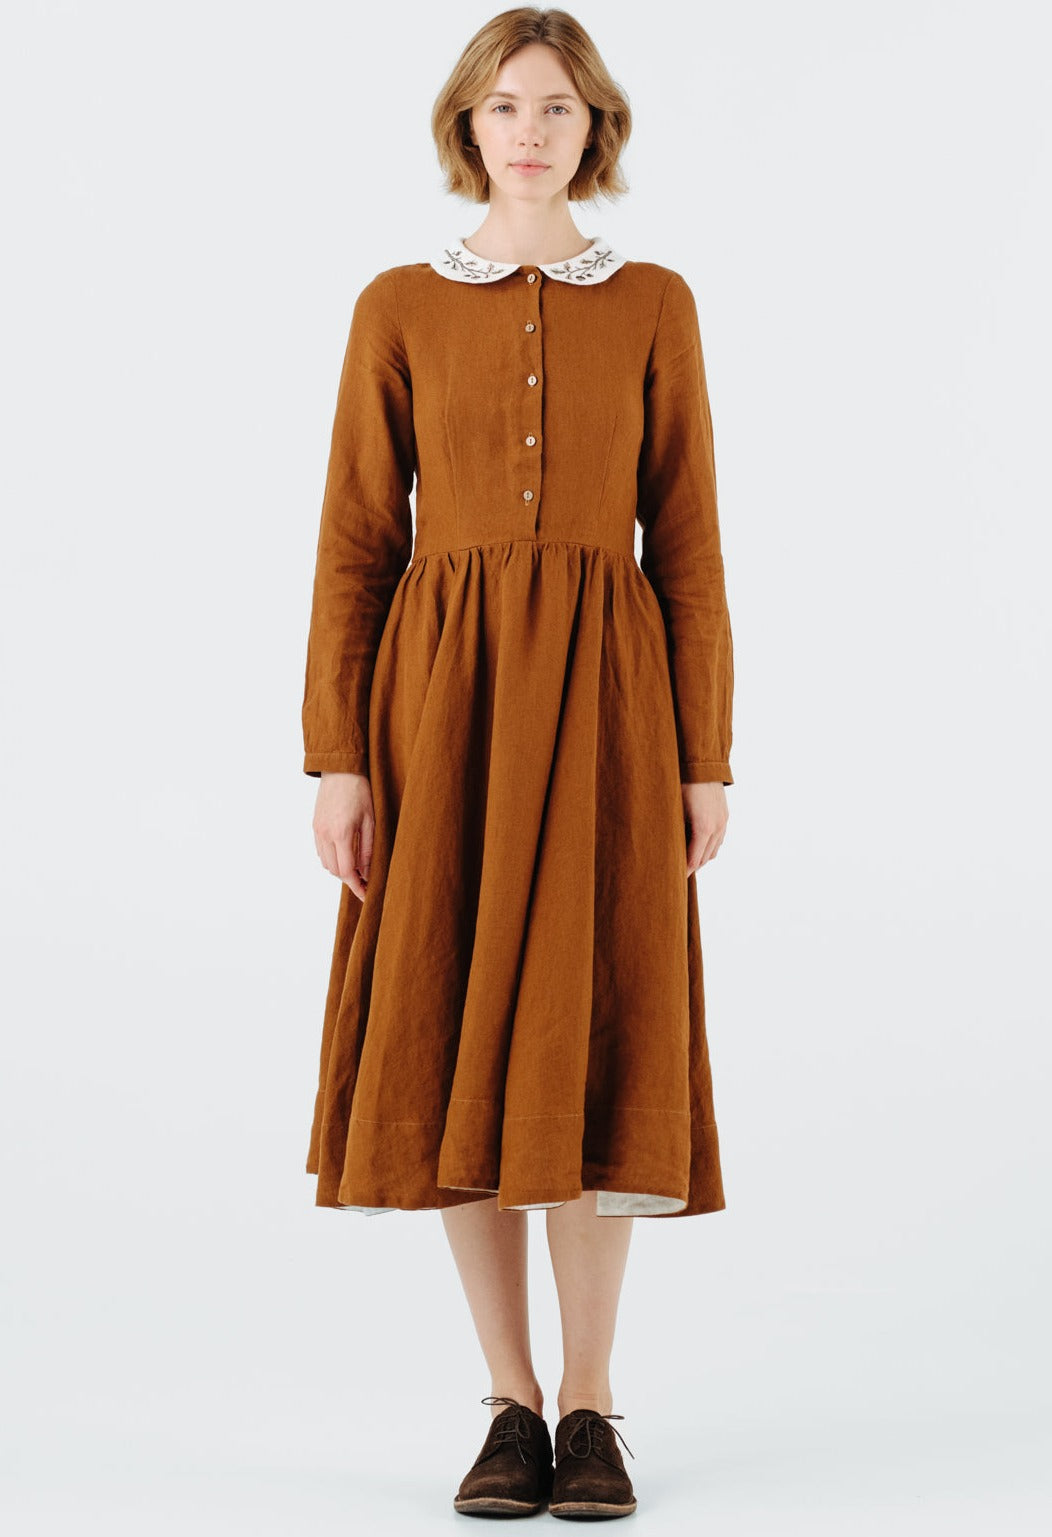 Linen Dresses With Embroidered Collar | Son de Flor